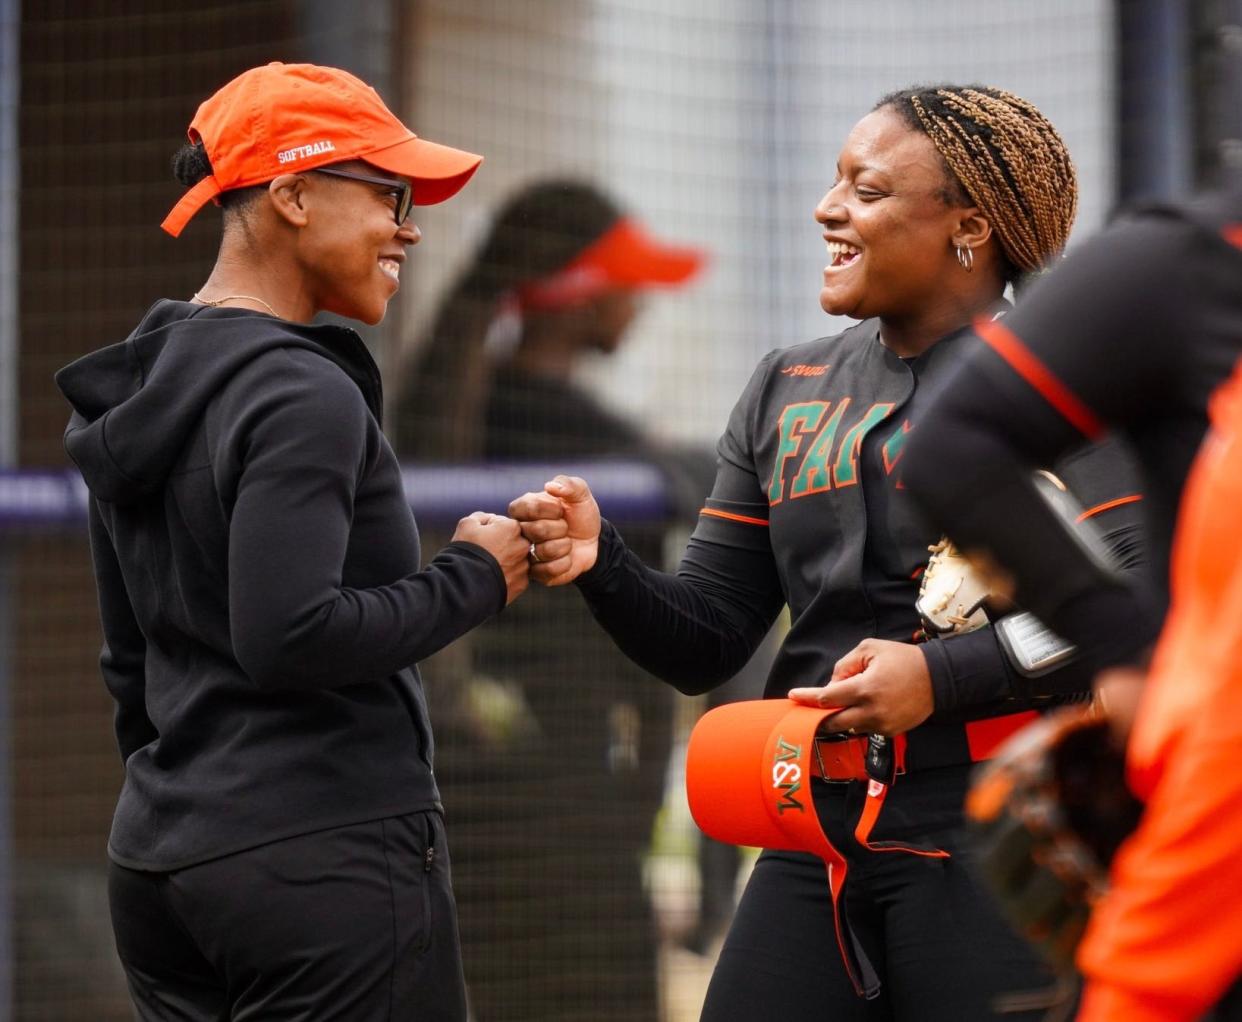 Florida A&M softball coach Camise Patterson and Nyah Morgan embraces each other during a 2022 game. Morgan was a hitting machine against Mississippi Valley State as she led the Rattlers with six hits and six RBI's during the Southwestern Athletic Conference series. She hit three doubles and a triple as she posted a .917 slugging percentage during the FAMU at MVSU series from April 22-23.